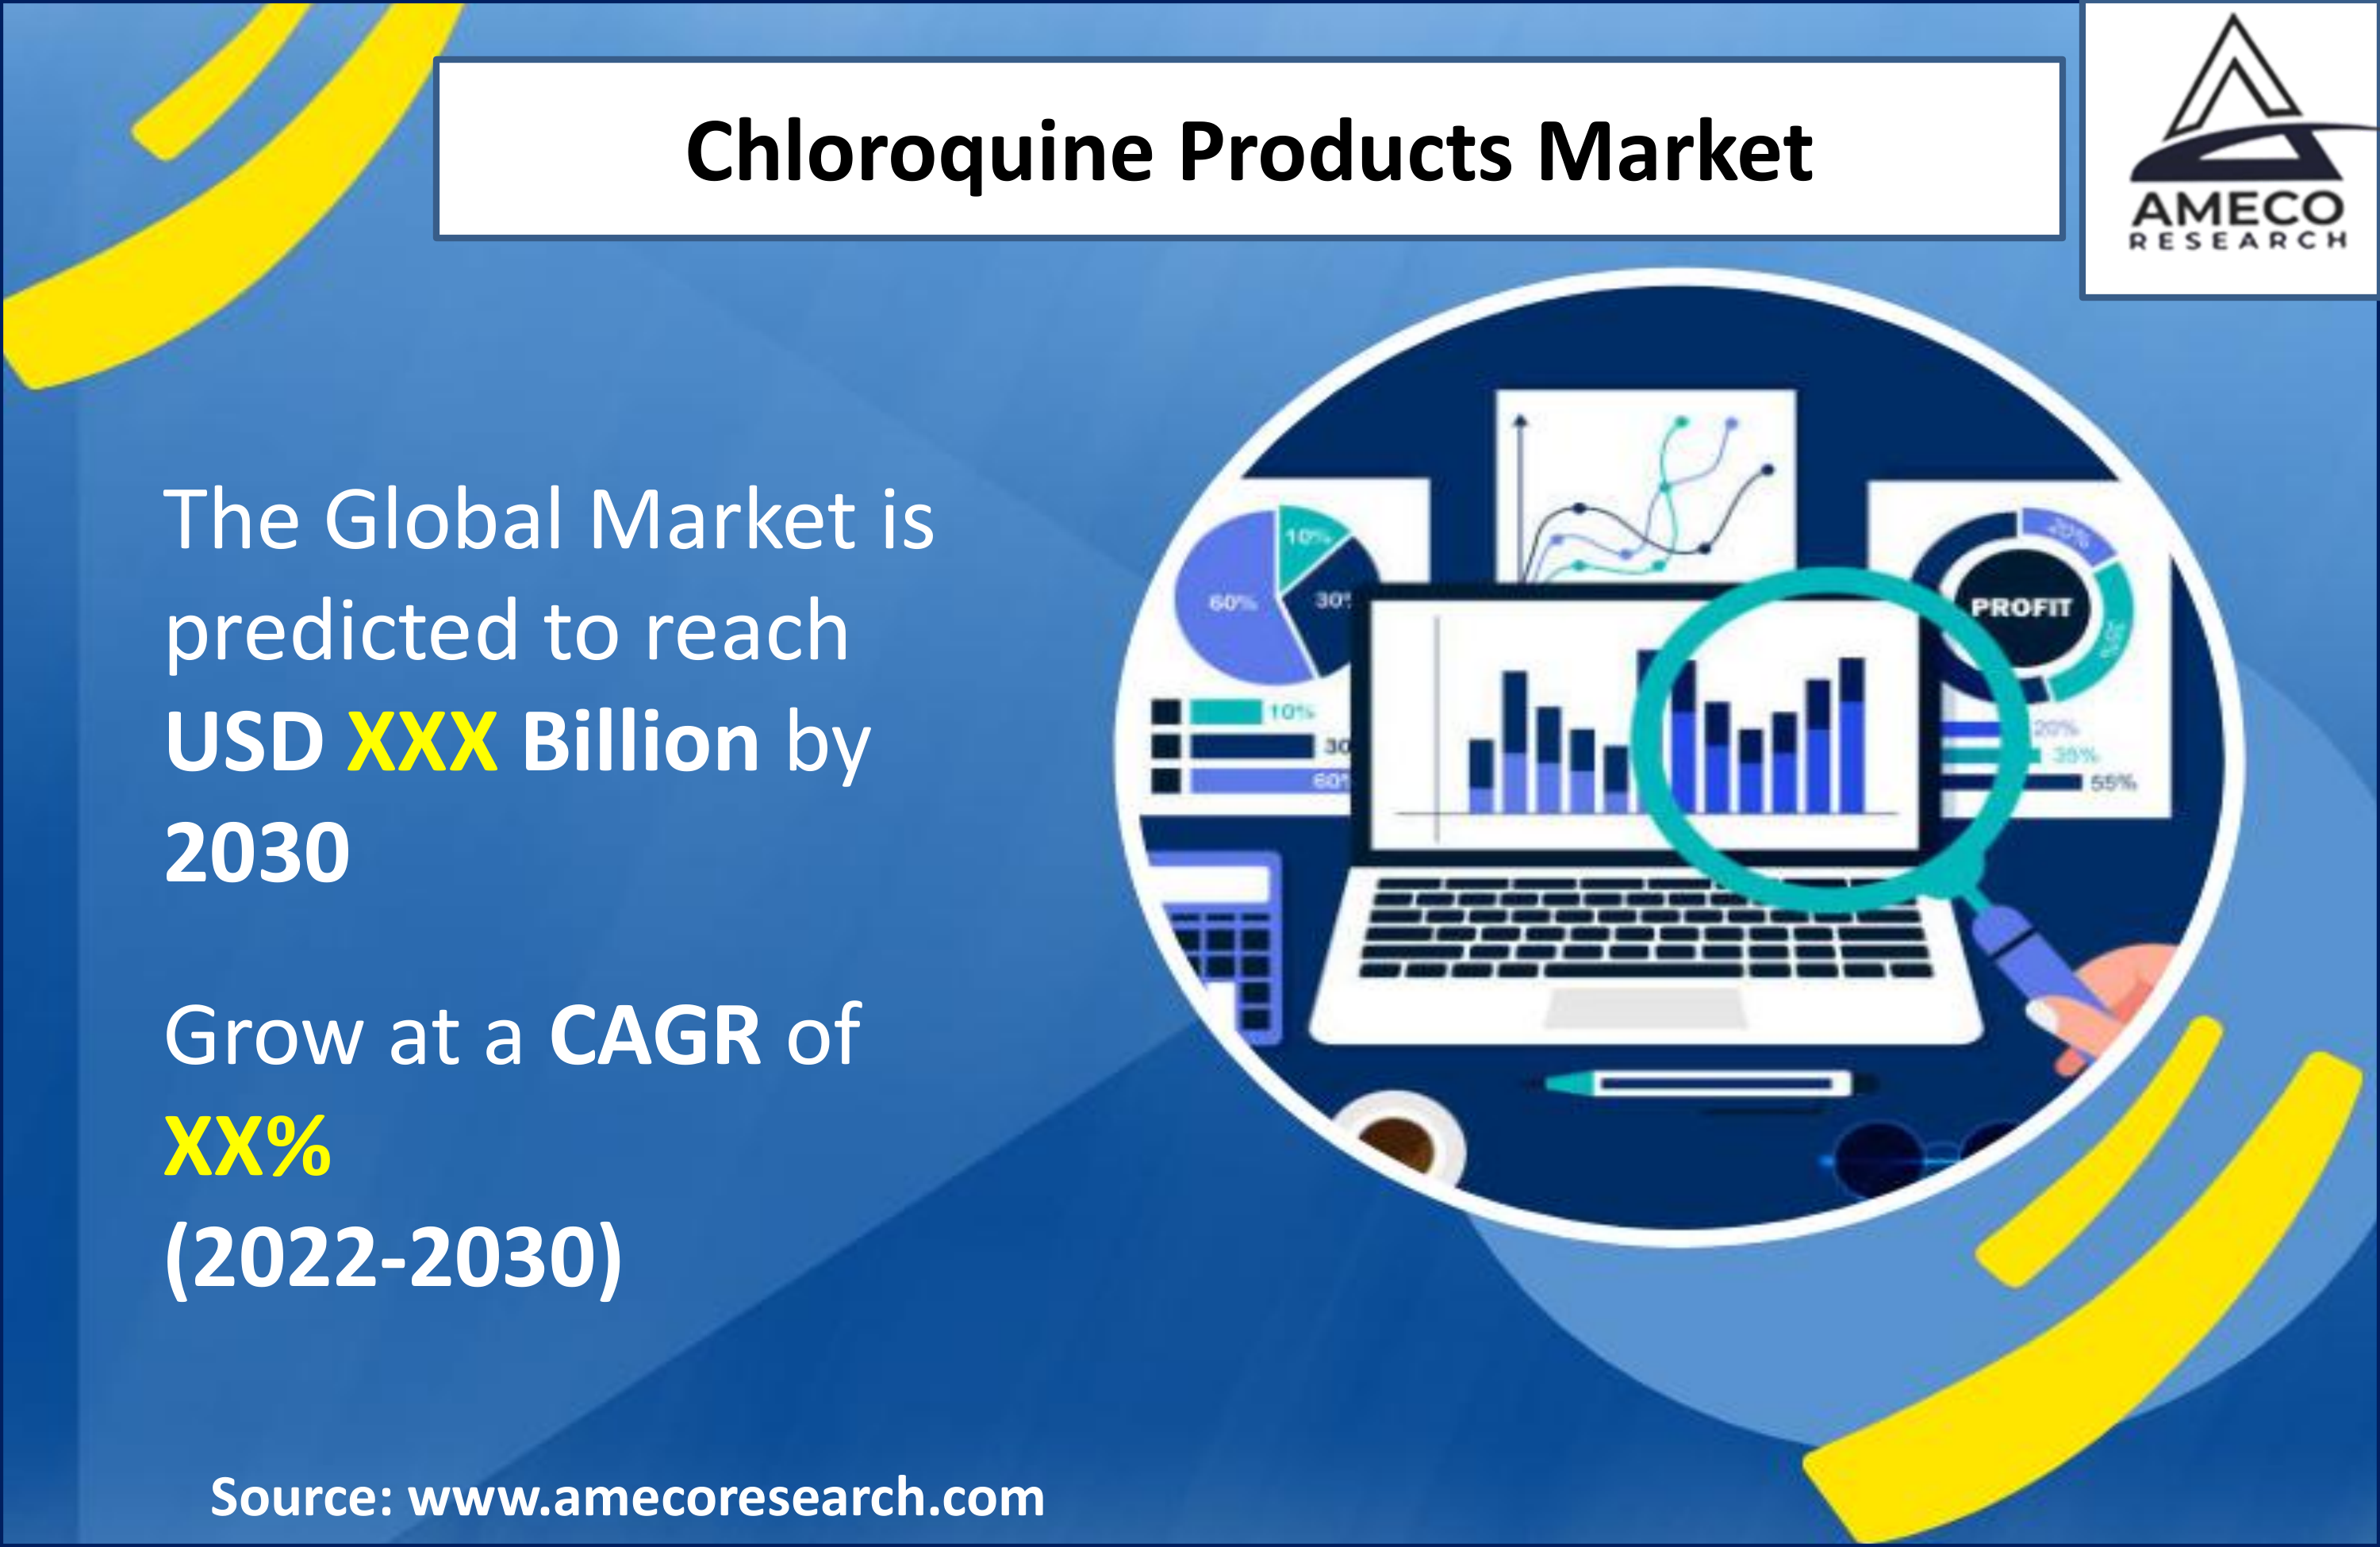 Chloroquine Products Market